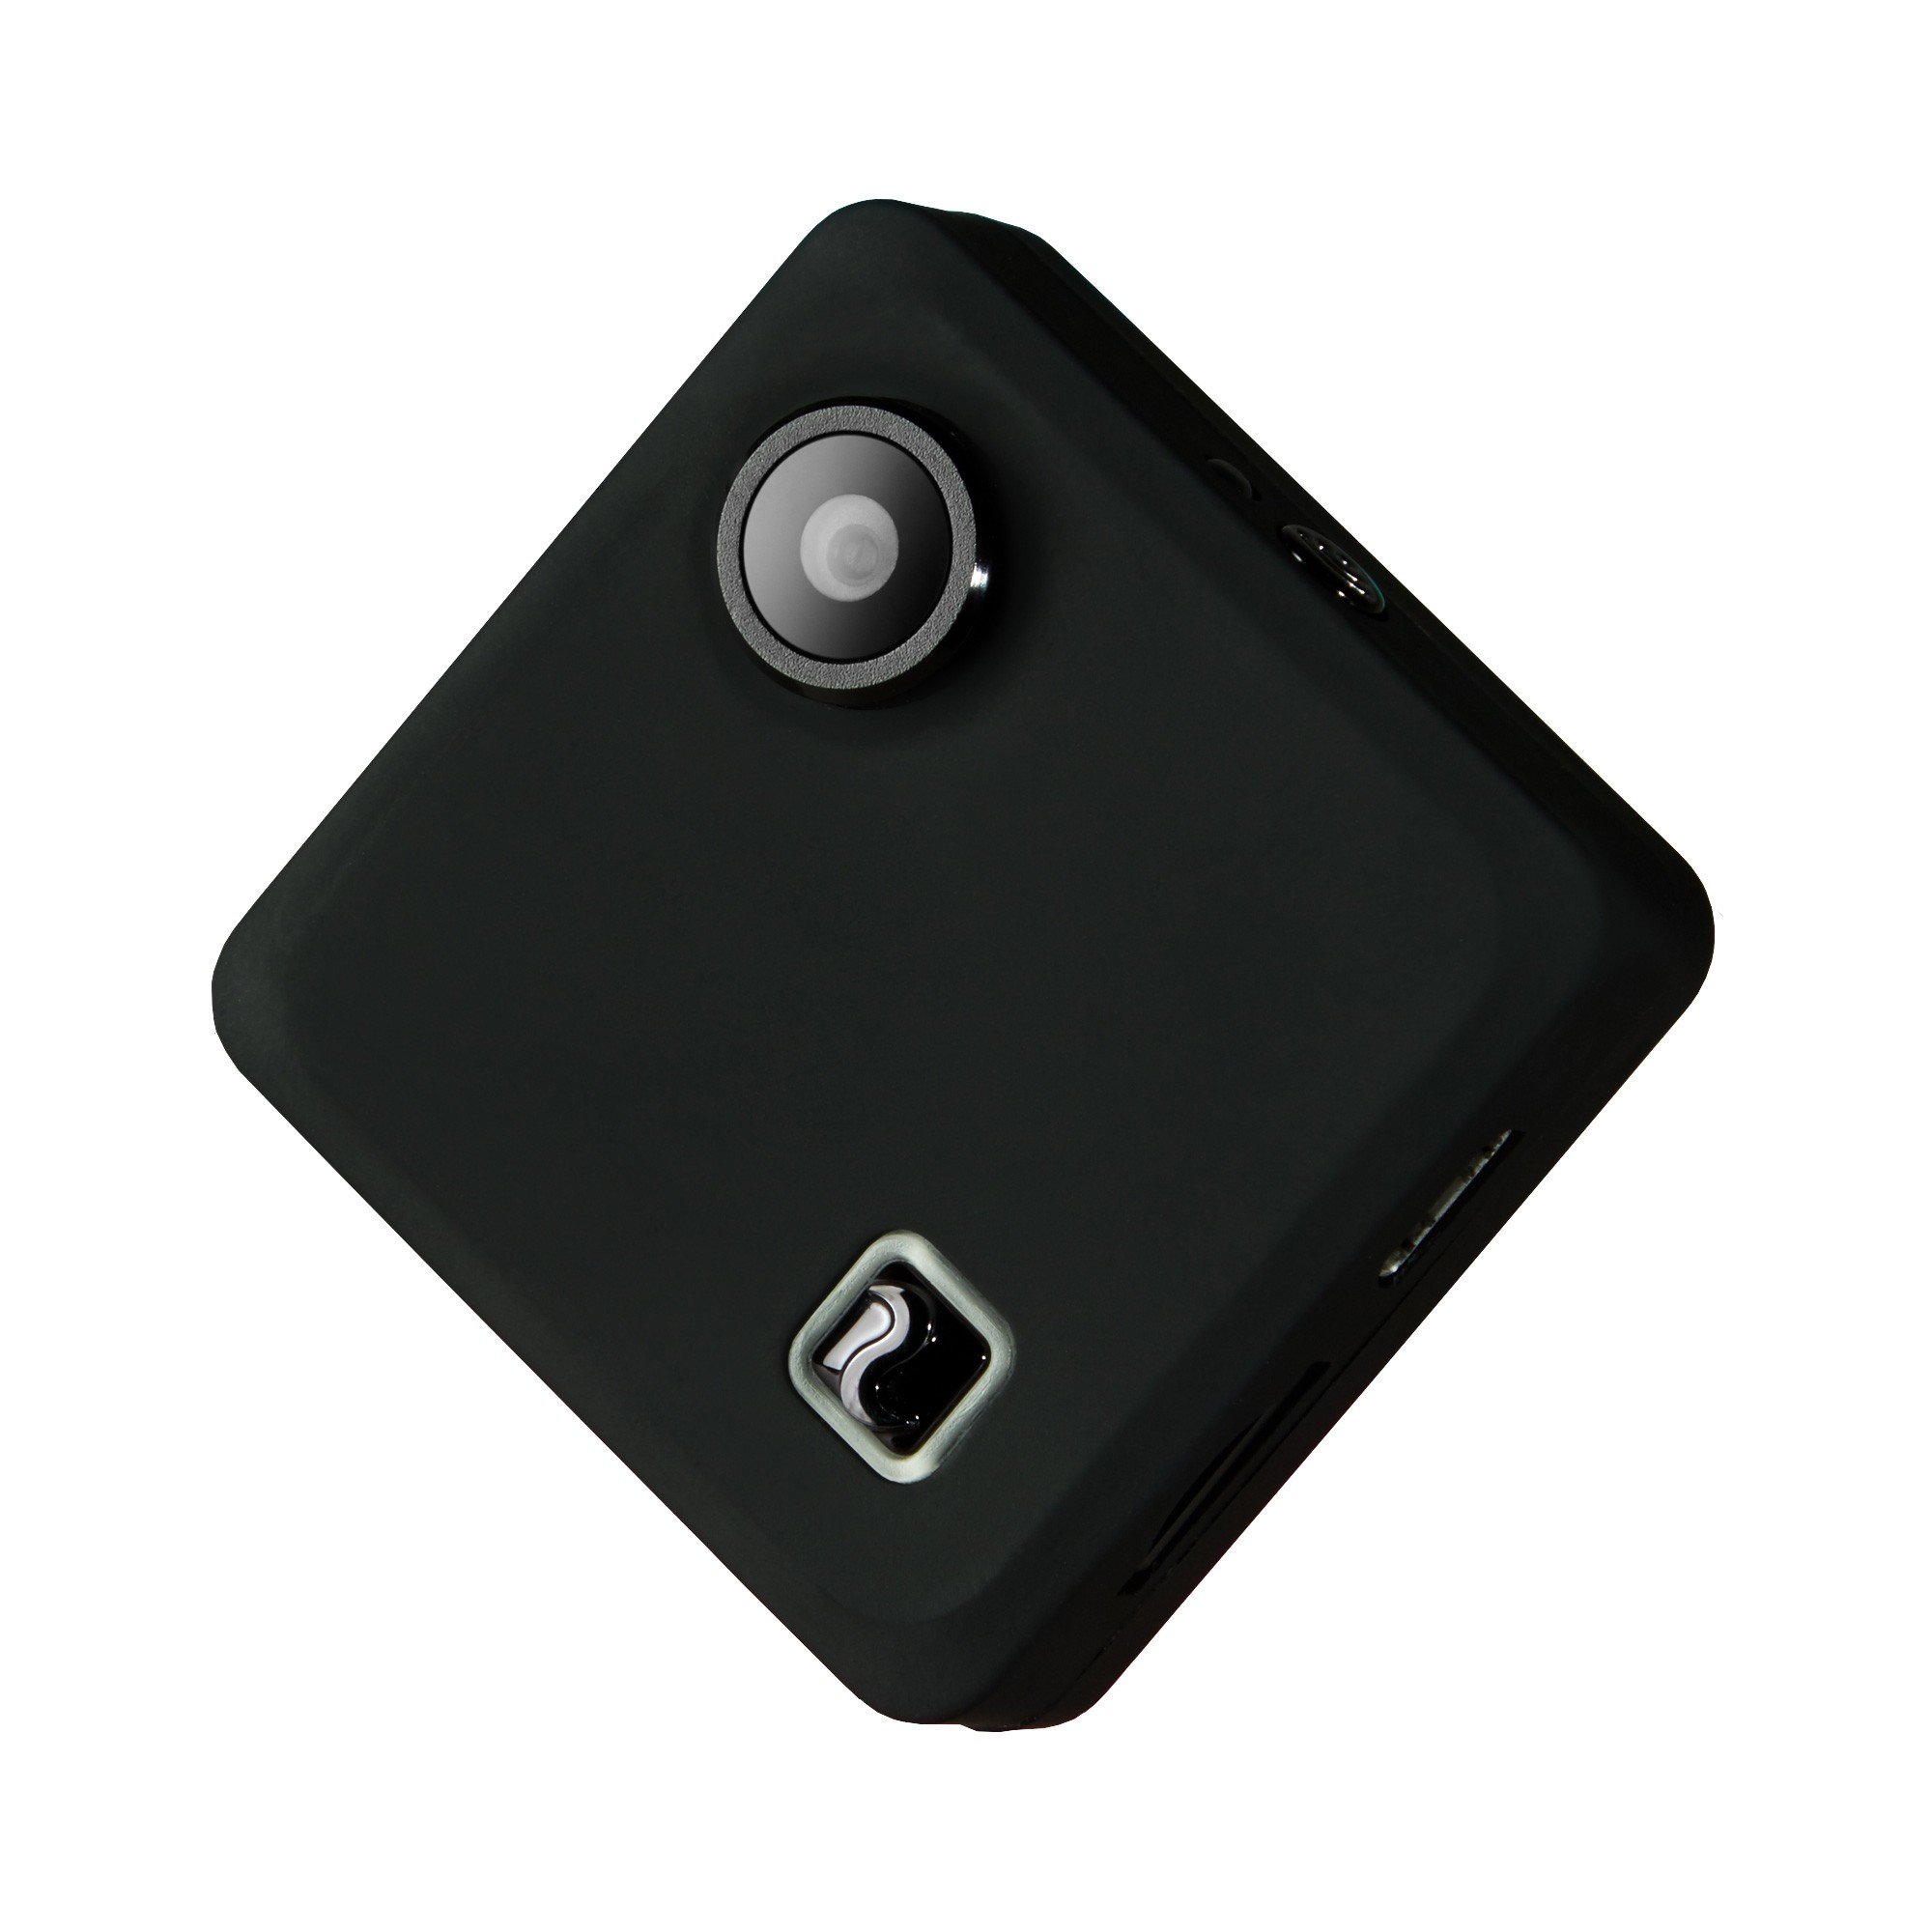 Drift Innovation Brings Lifelogging To The Mainstream With New Wearable Camera, The Compass